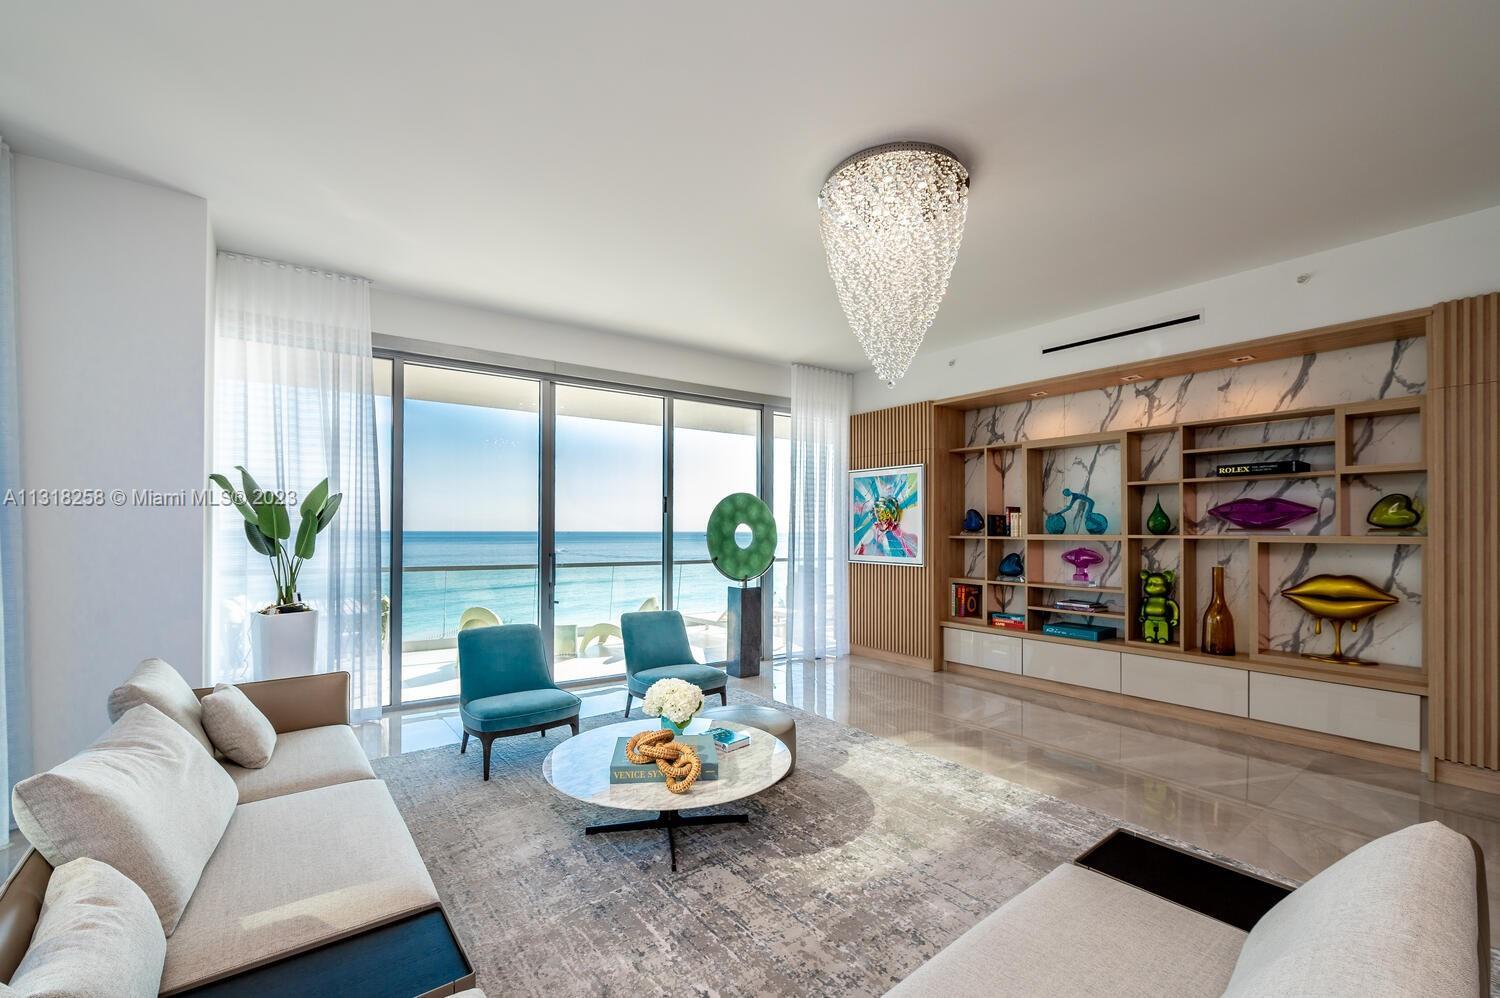 Welcome to this exquisite turnkey residence at Turnberry Ocean Club, tastefully furnished by Artefac